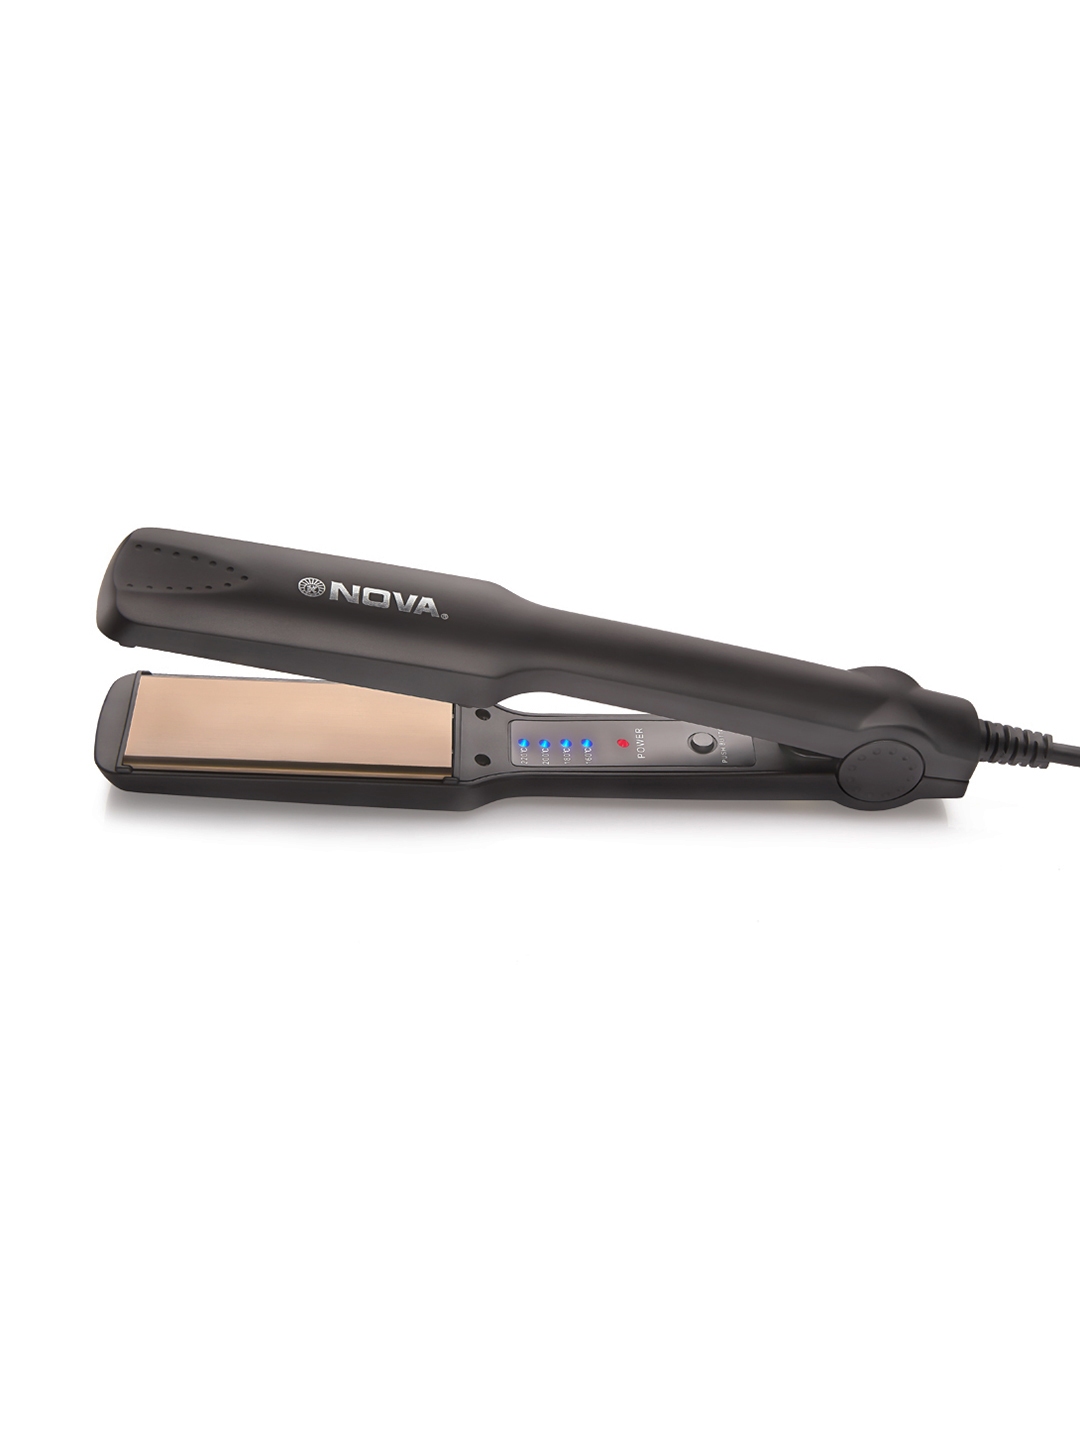 VEGA Adore Hair Straightener with Ceramic Coated Plates  Quick HeatUp  VHSH18 Color May Vary Made In India  Amazonin Beauty